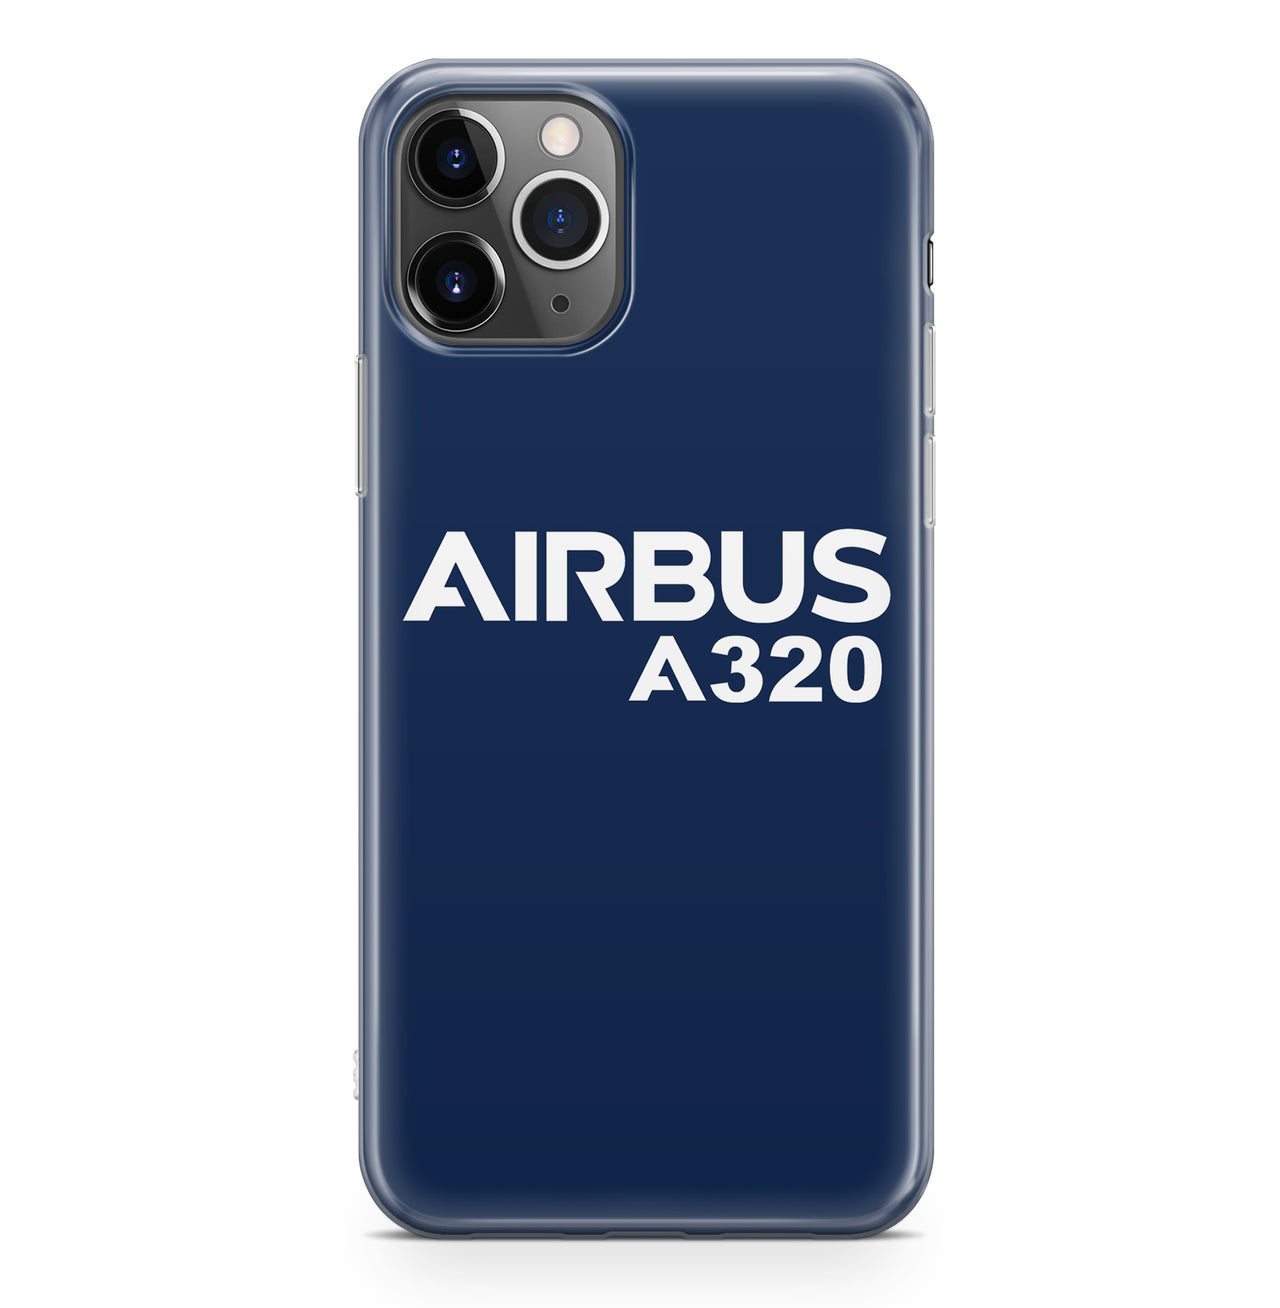 Airbus A320 & Text Designed iPhone Cases